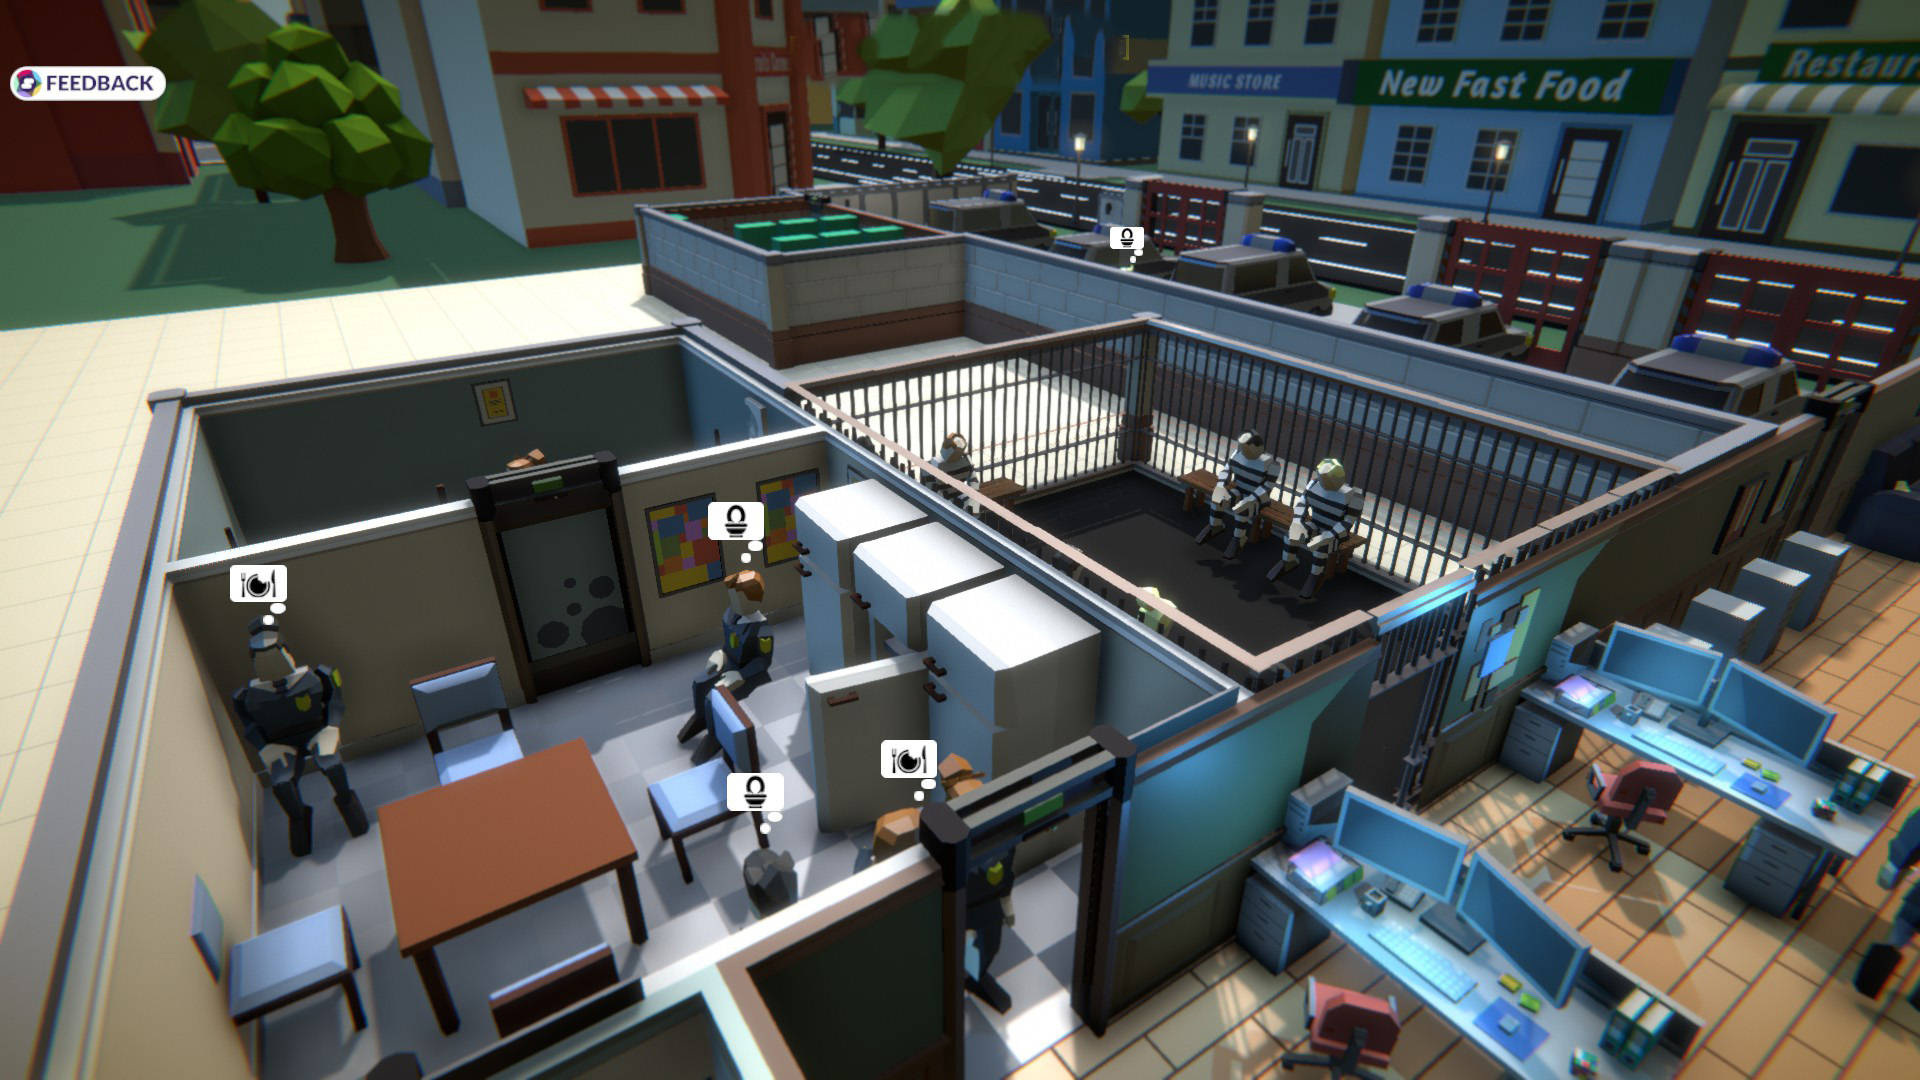 Rescue HQ - The Tycoon Free Download